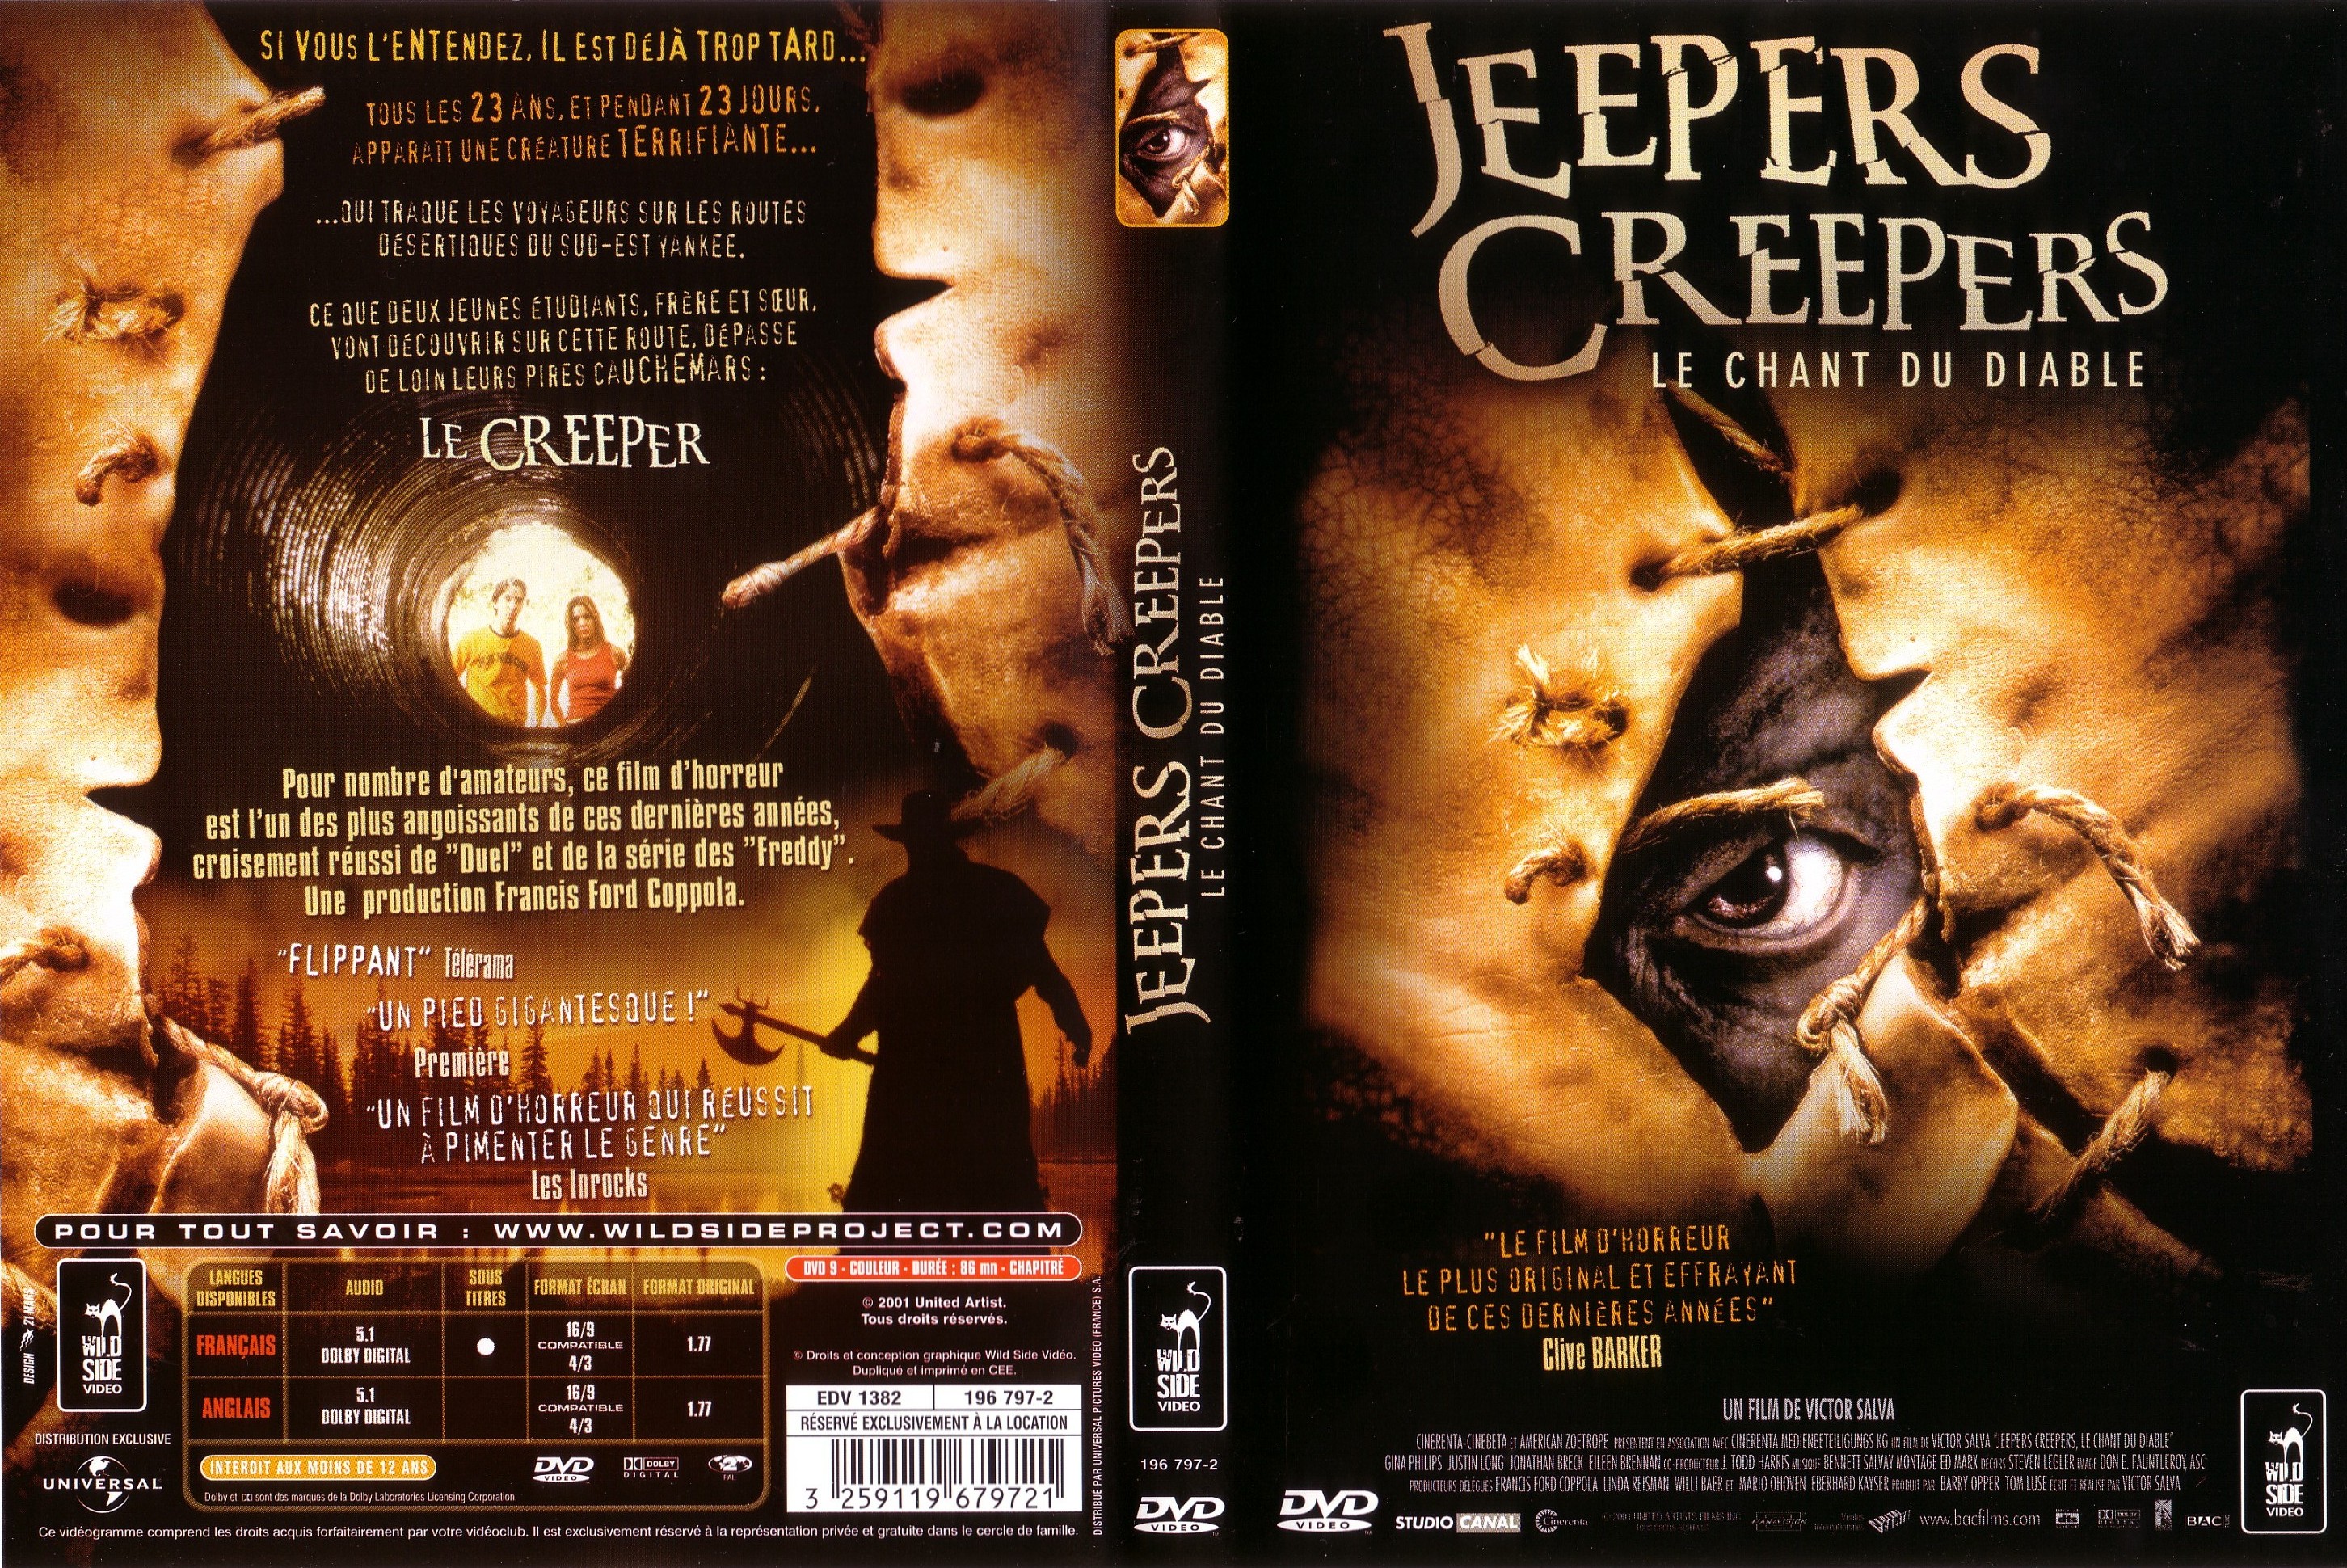 Jeepers Creepers 3 French Dvdrip Torrent paillardes campagnes motocross france2 trucages vertex